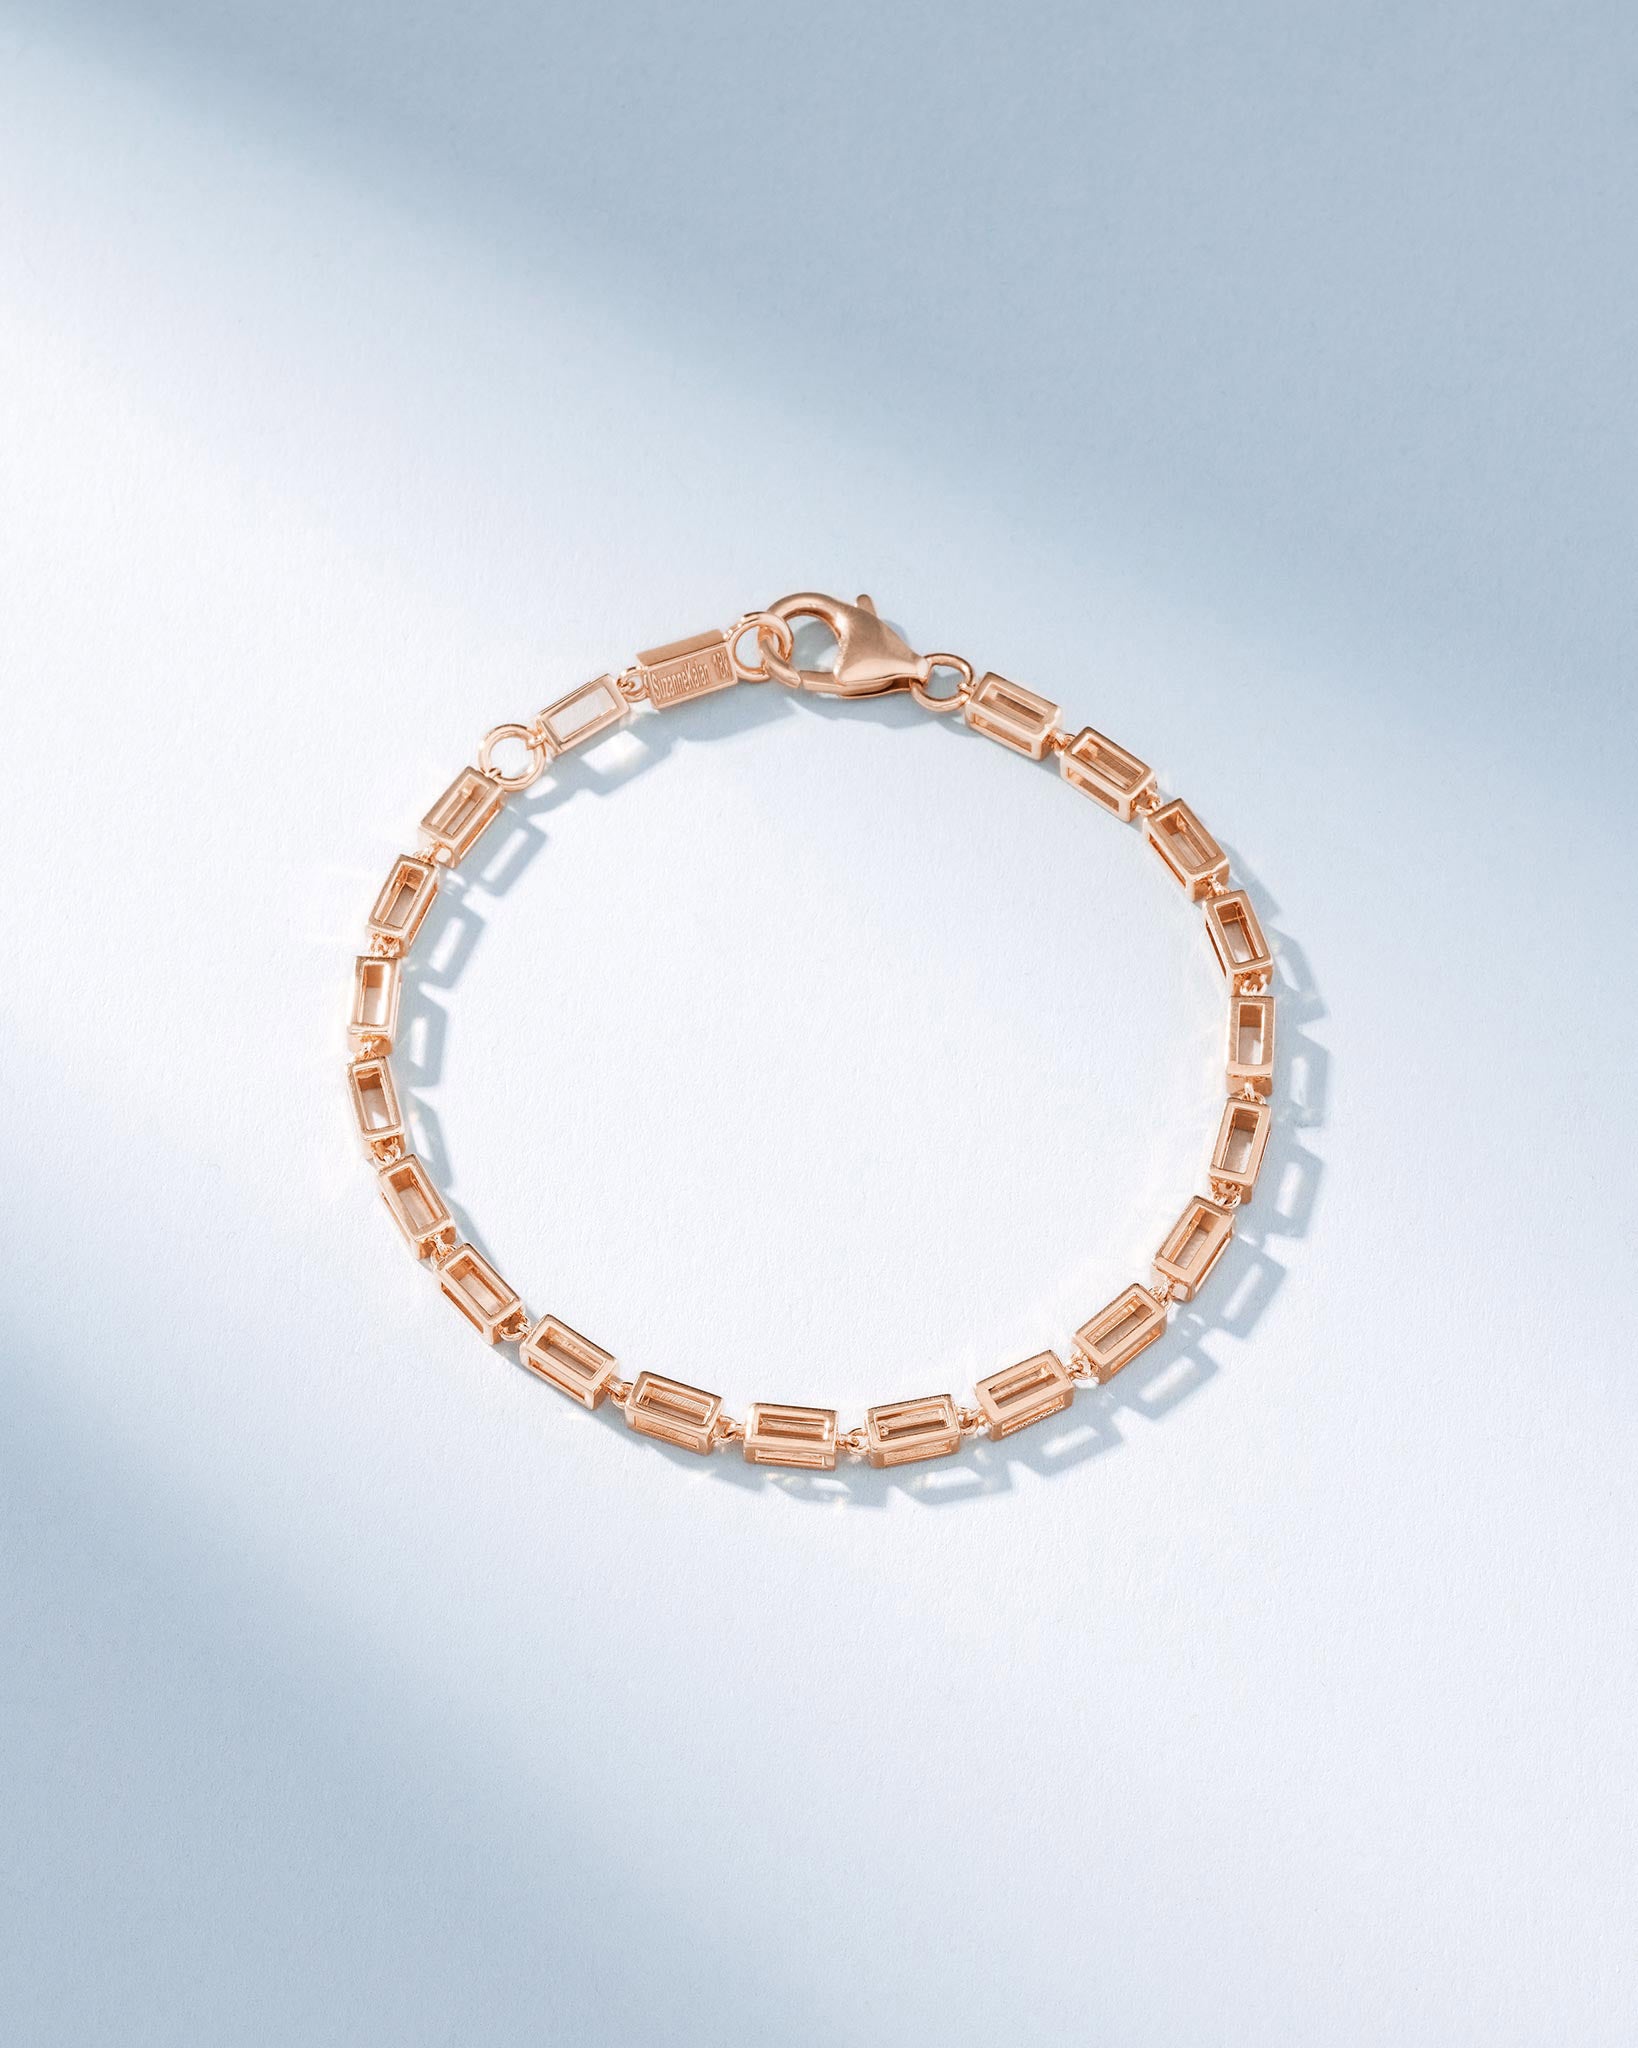 Suzanne Kalan Block-Chain Hollow Thick Bracelet in 18k rose gold